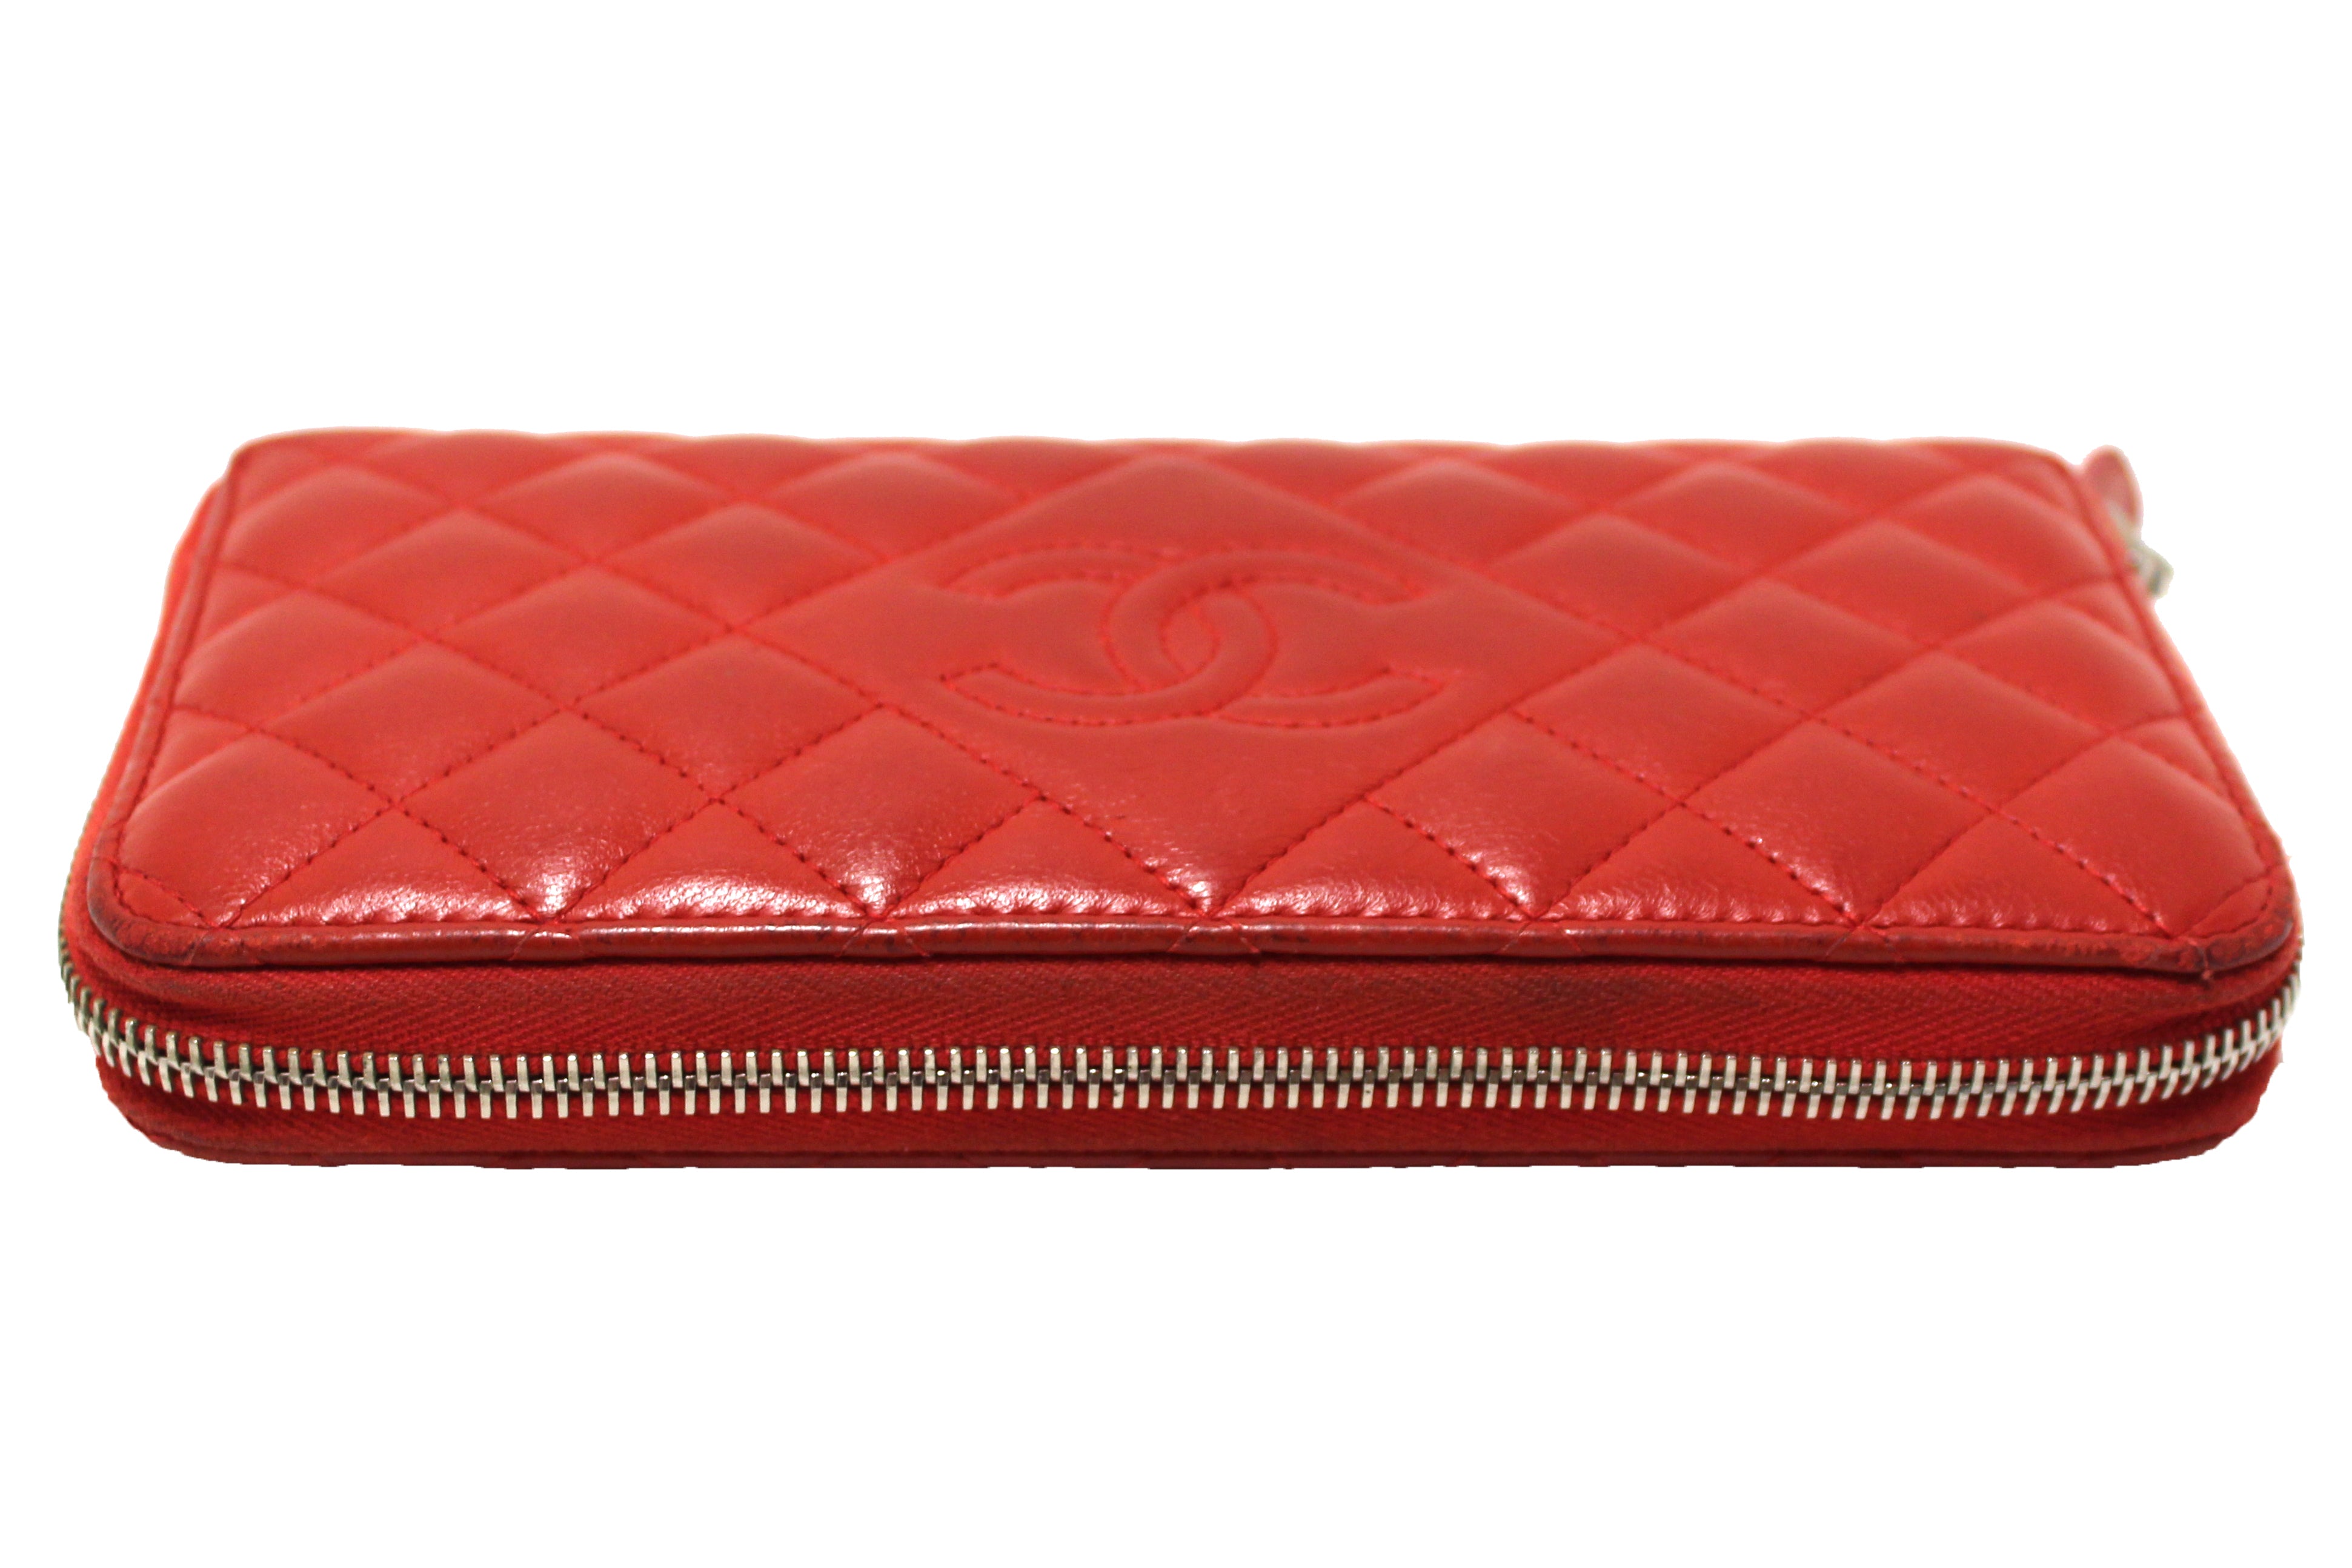 Authentic Chanel Red Quilted Lambskin Leather Zippy Wallet